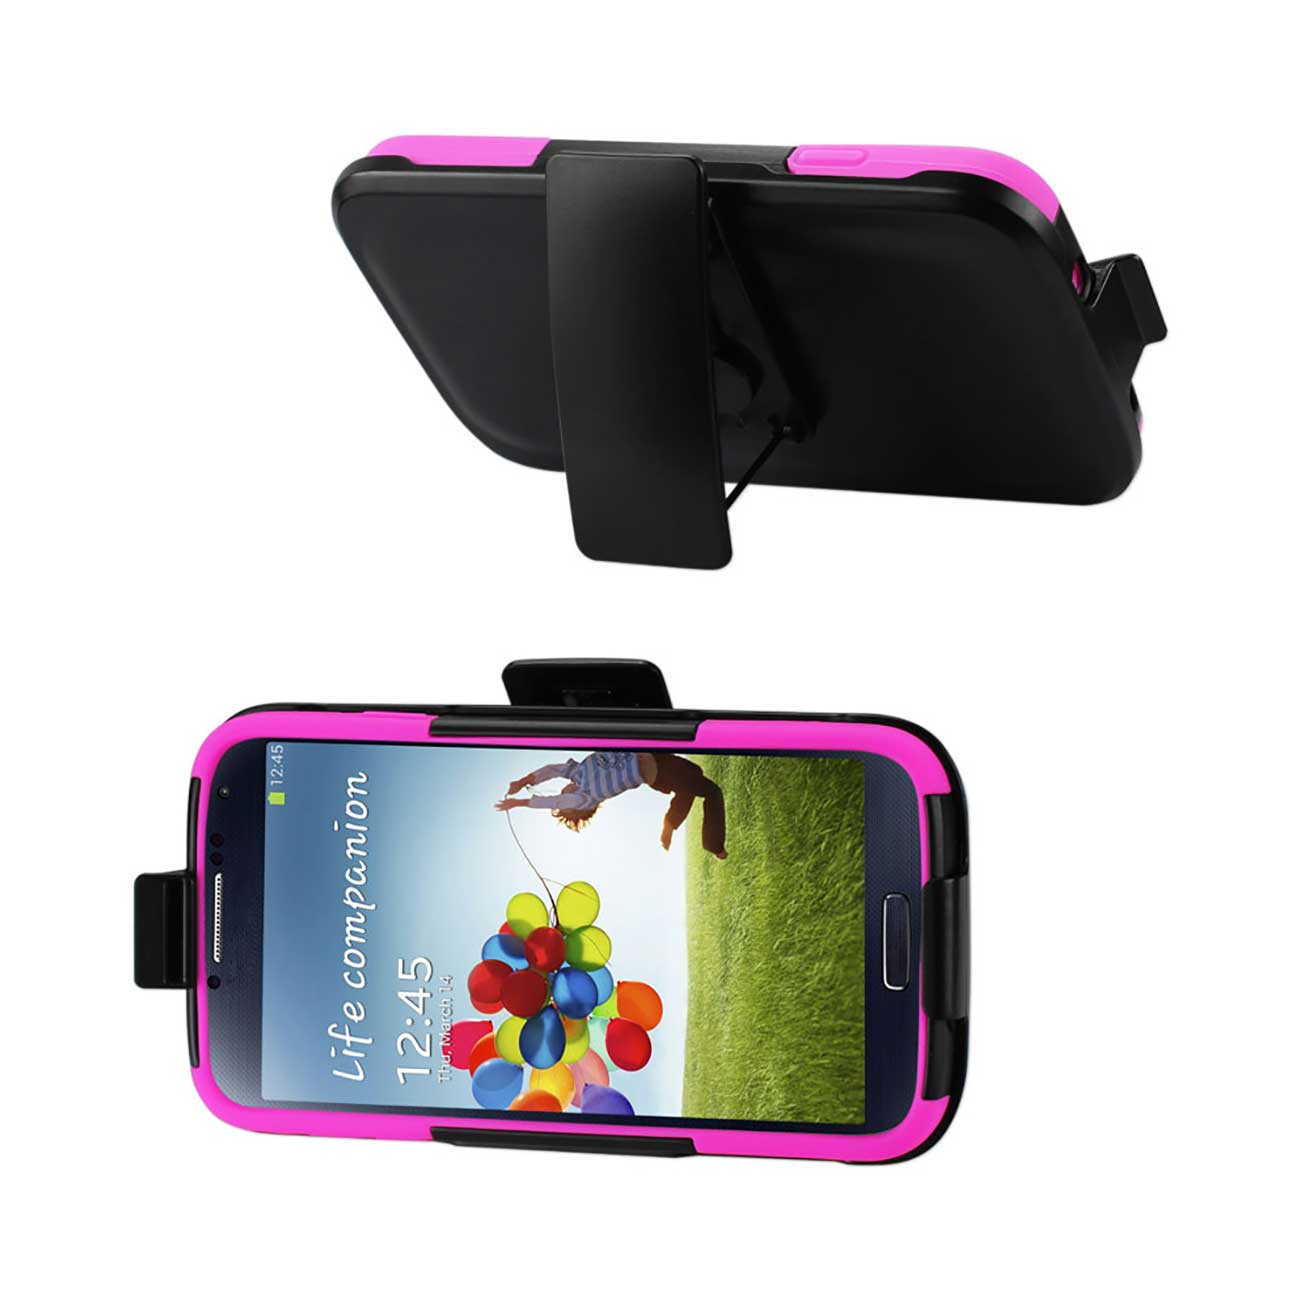 Reiko Samsung Galaxy S4 3-In-1 Hybrid Heavy Duty Holster Combo Case In Hot Pink Black